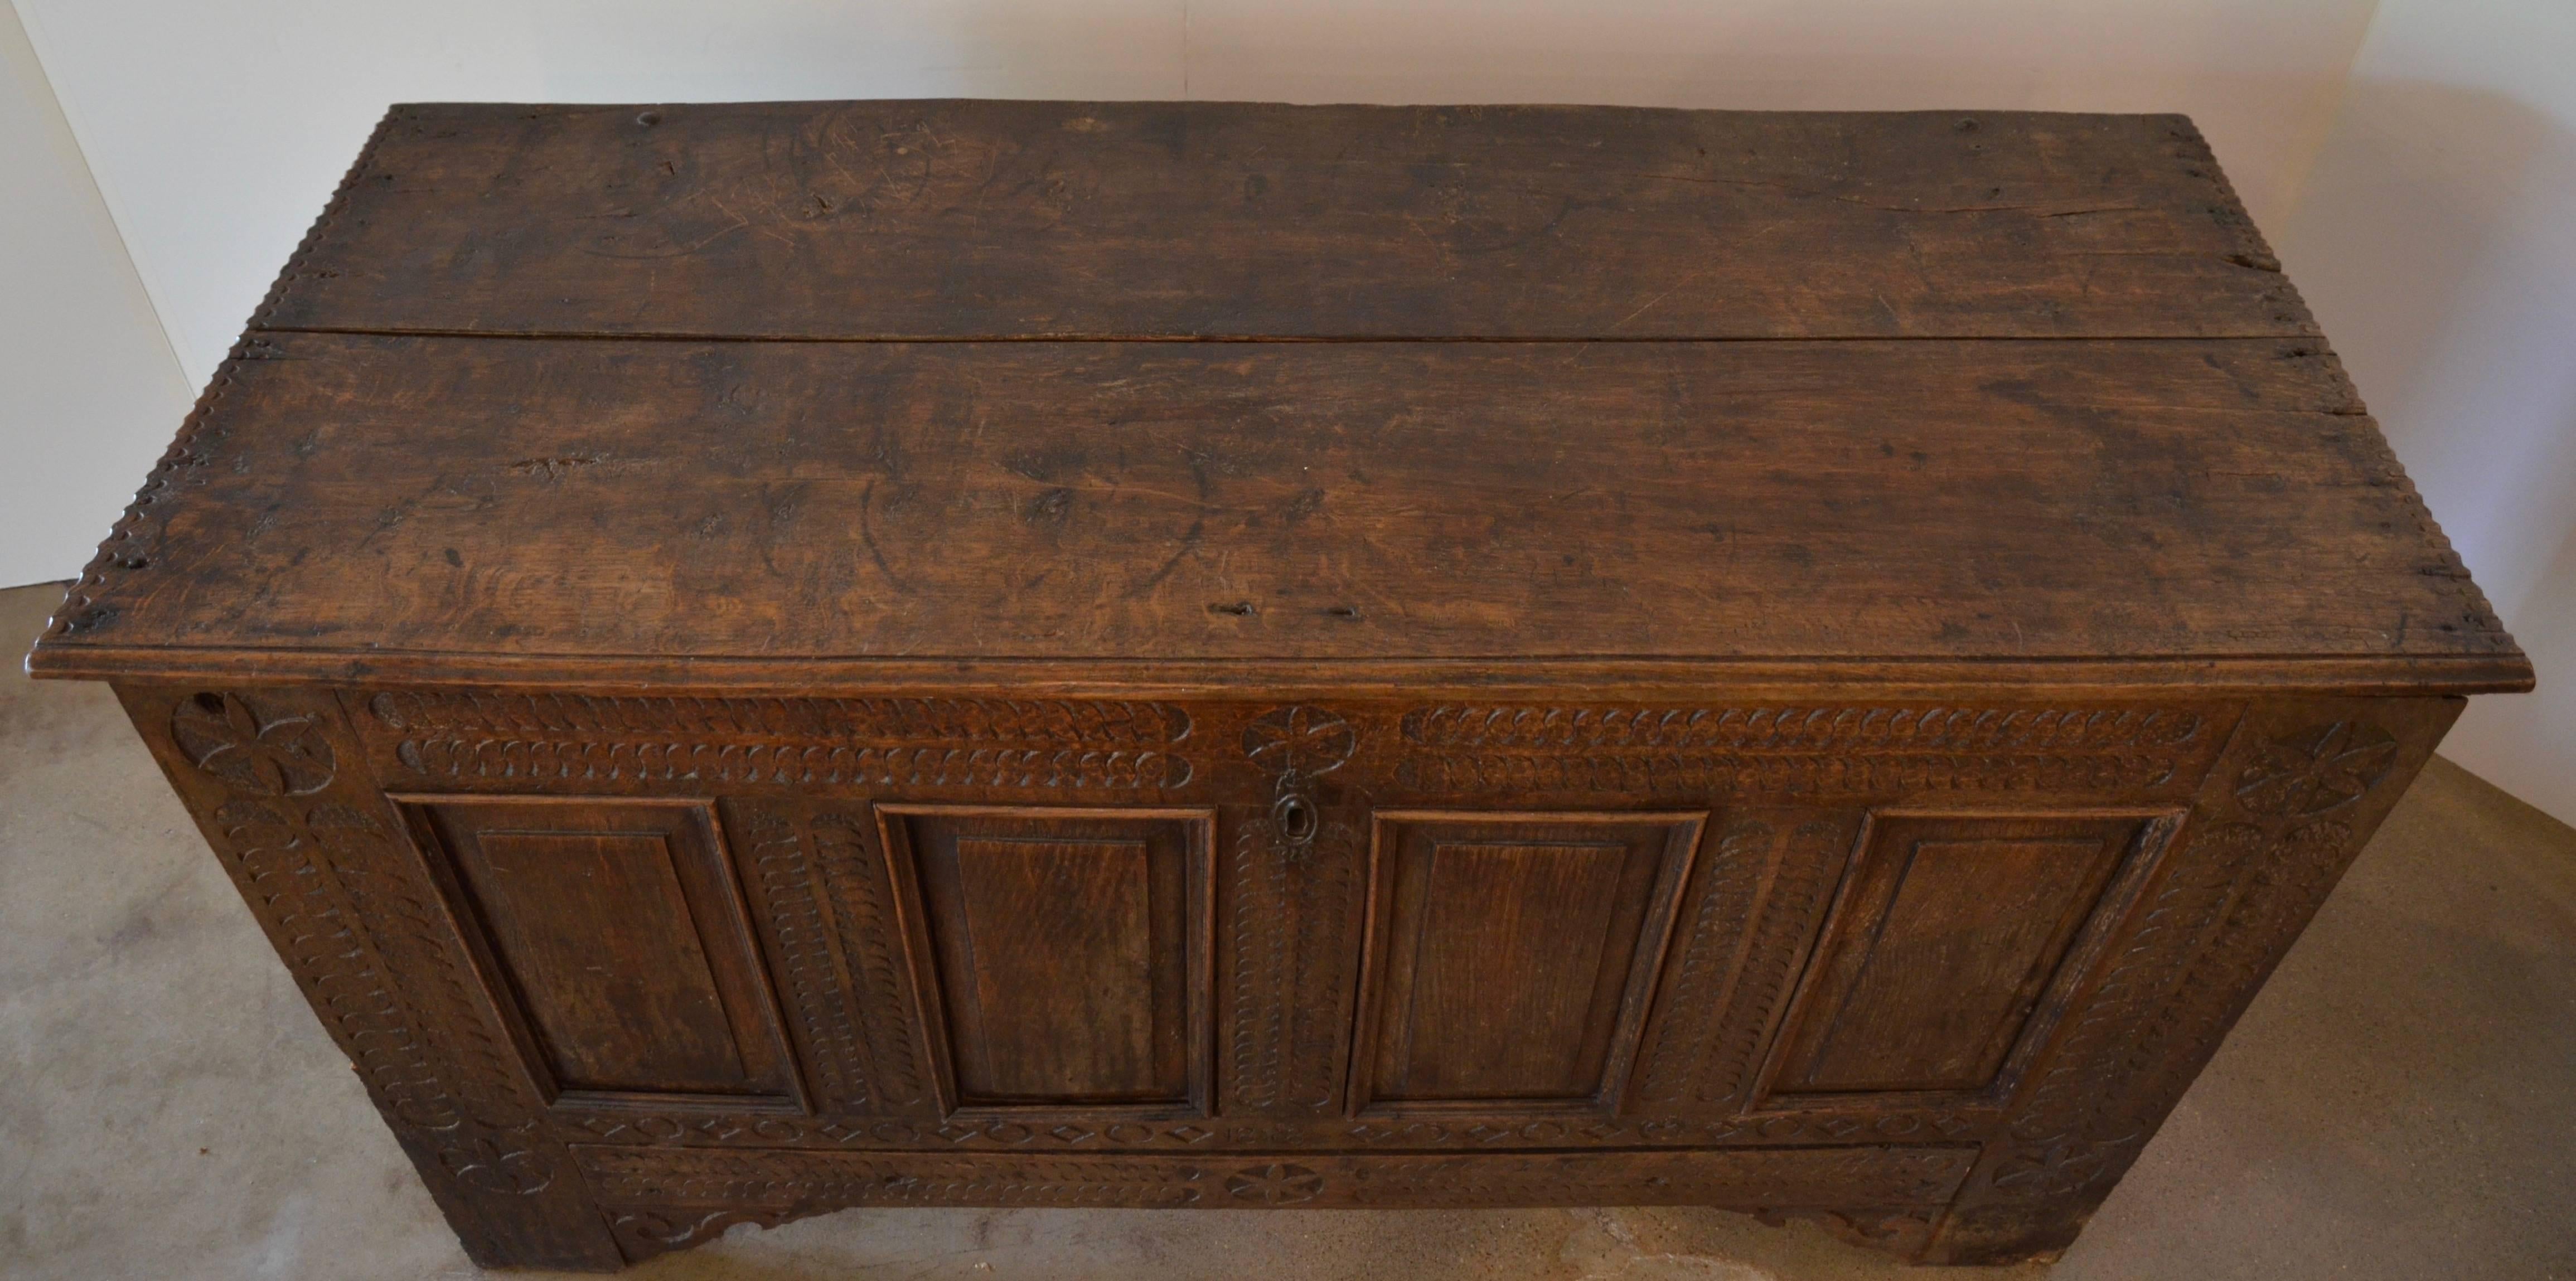 Wood Chip-Carved German Pennsylvania Blanket Chest